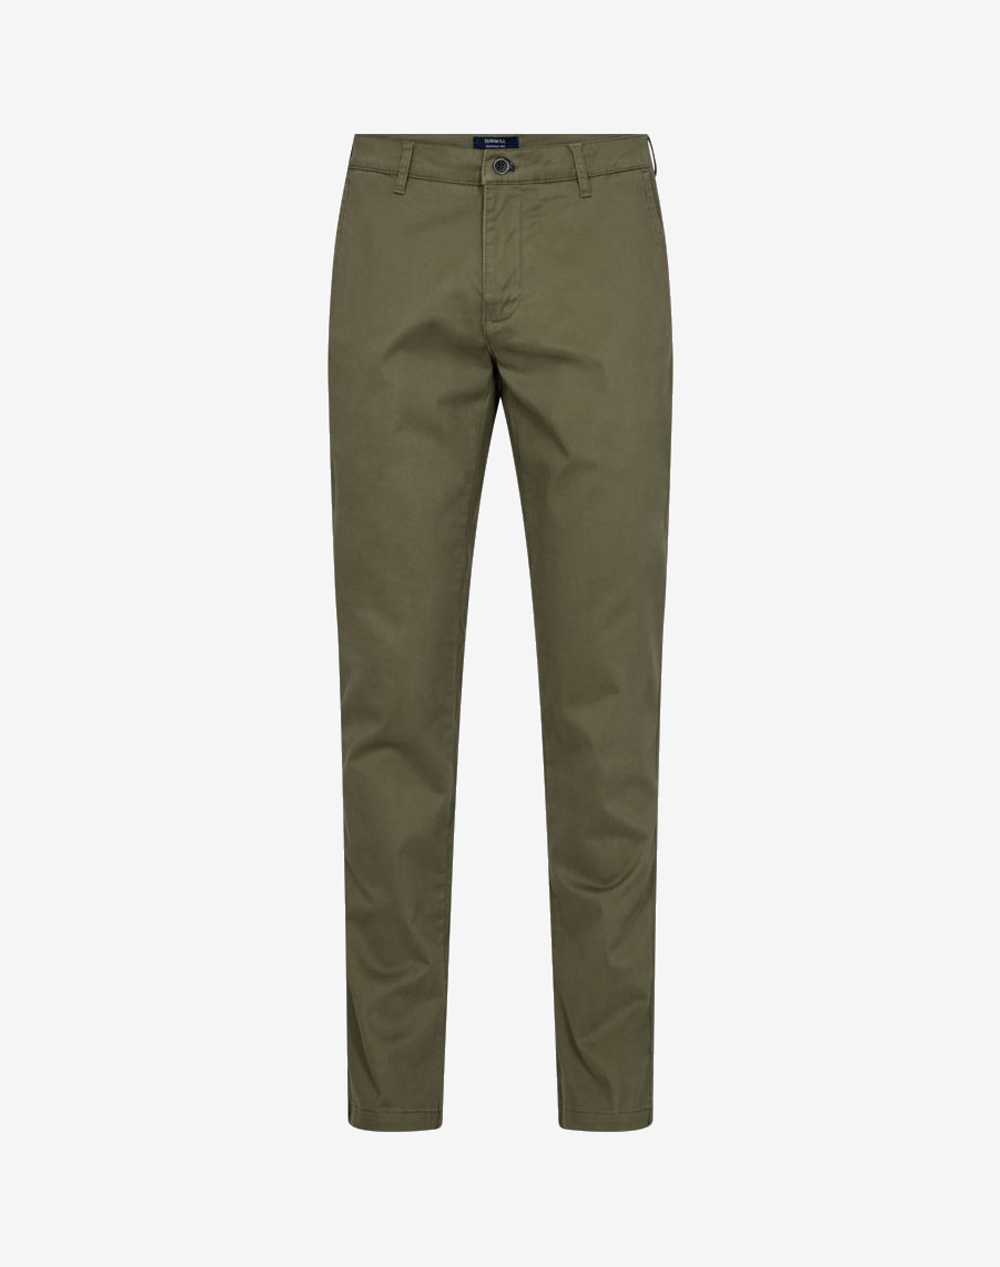 SUNWILL CHINO EXRTREME FLEXIBILITY TROUSERS 425127-8350-245 Olive